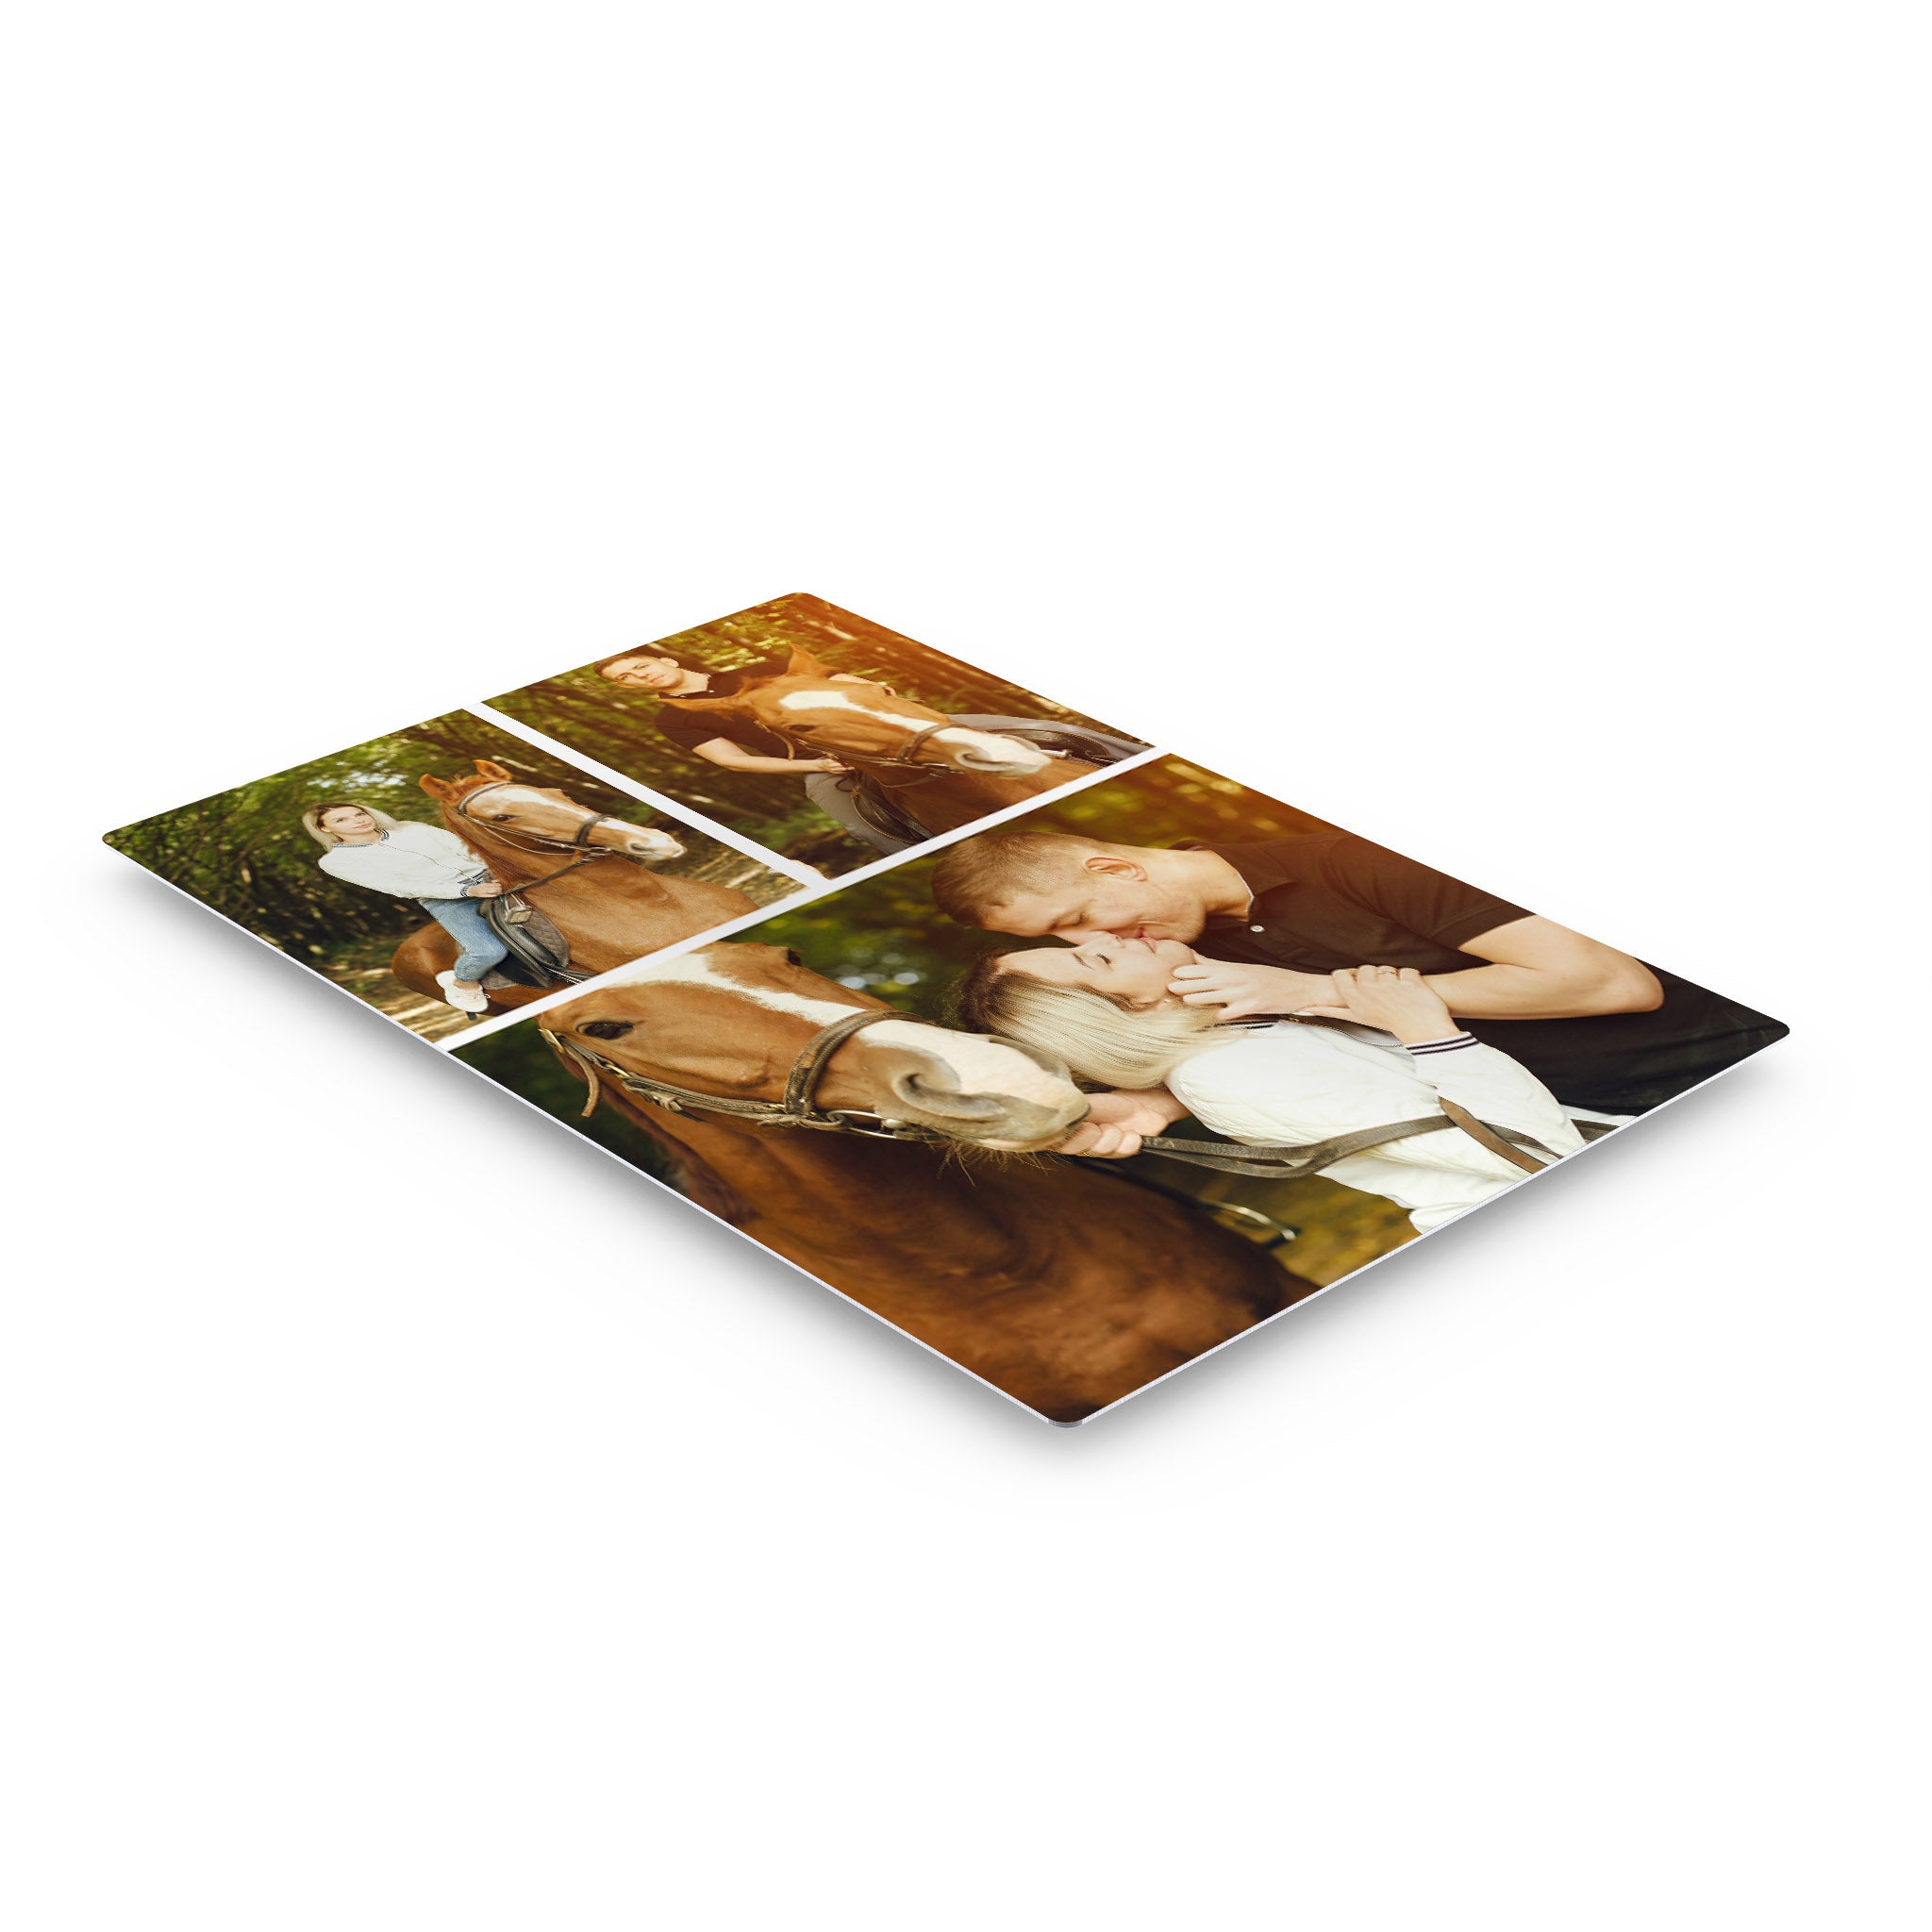 Custom Photo Collage Personalized Wall Art